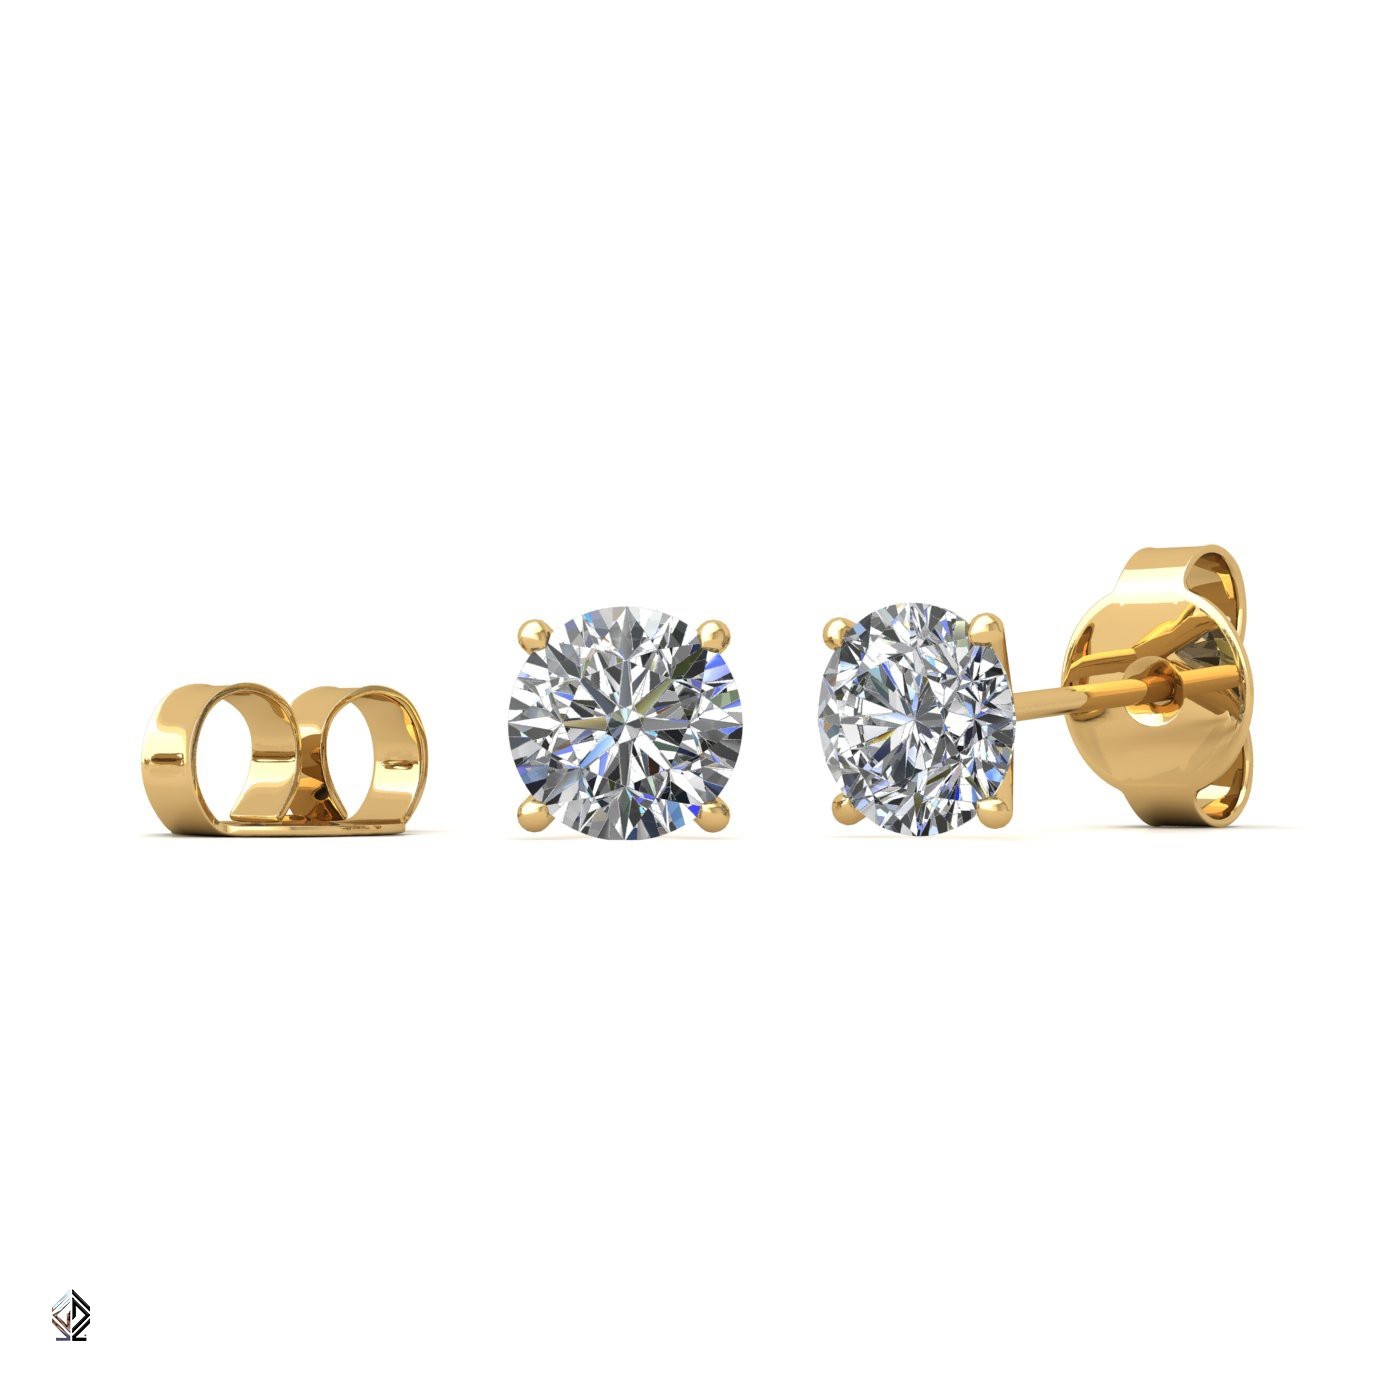 18k yellow gold 2.5 ct each (5,0 tcw) 4 prongs round cut classic diamond earring studs Photos & images